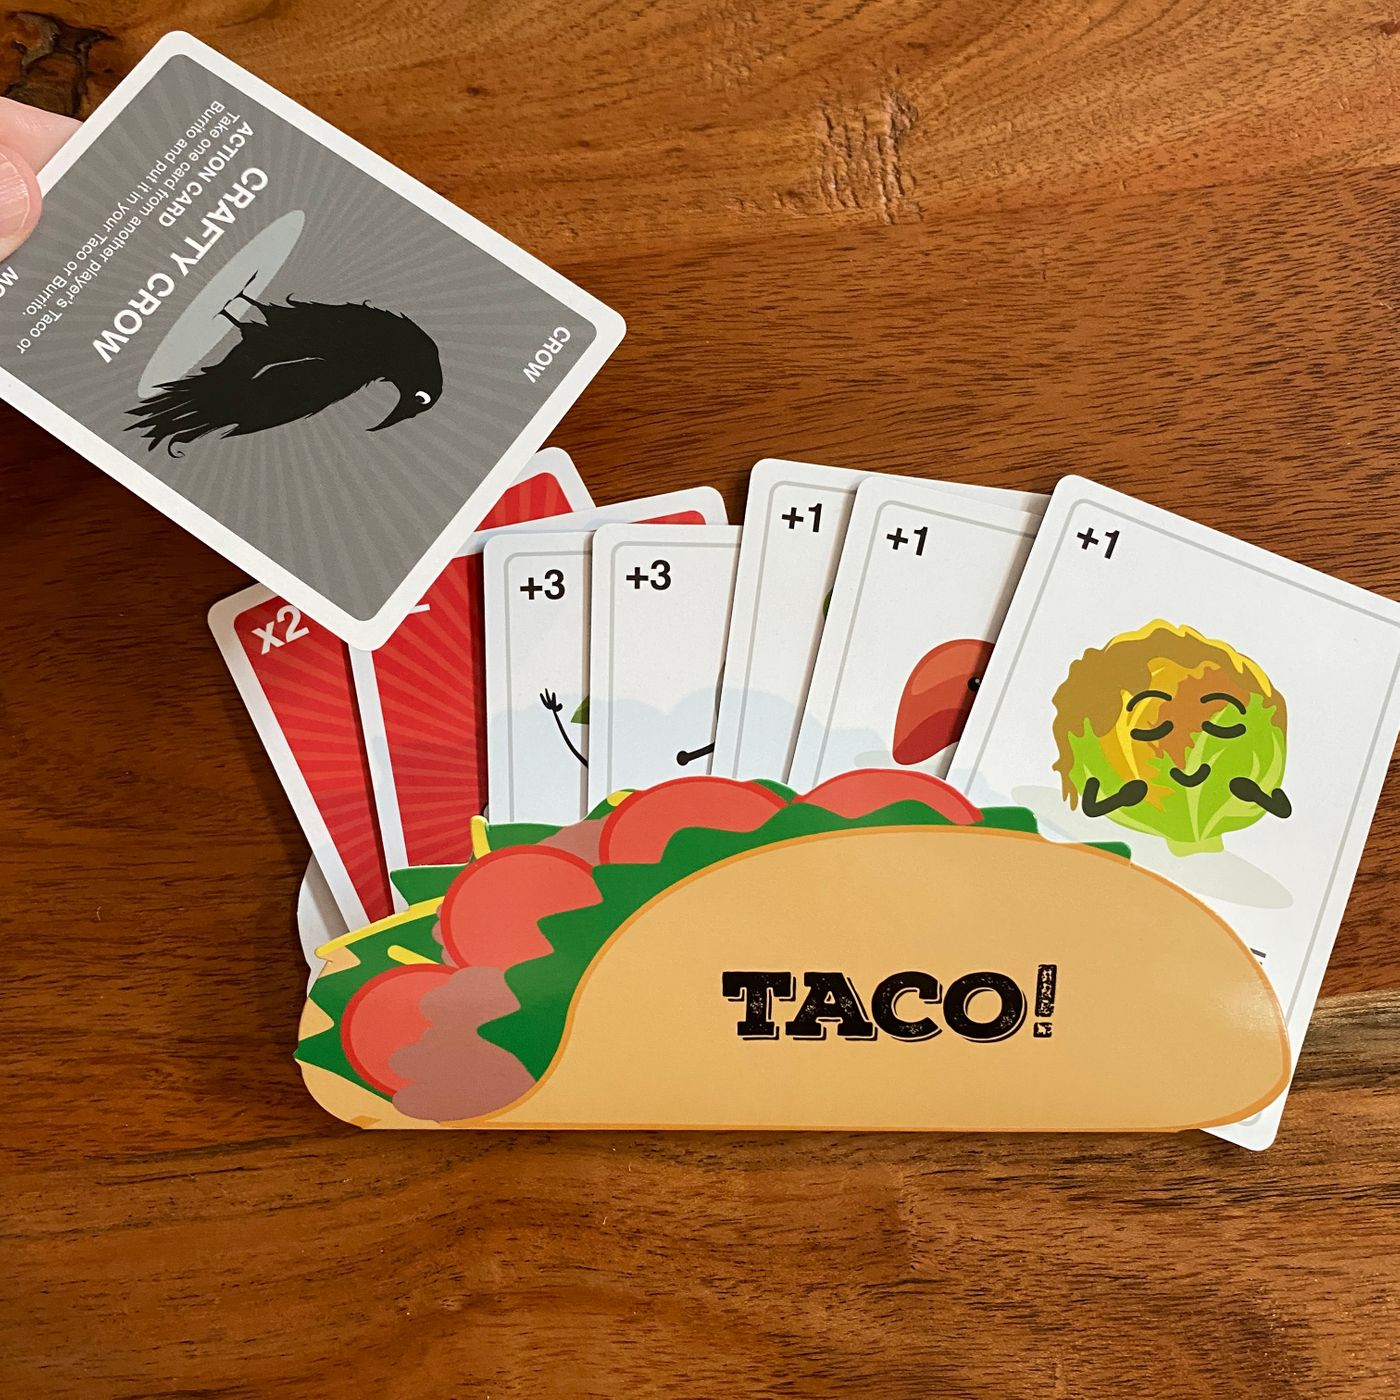 card game gift idea for dad